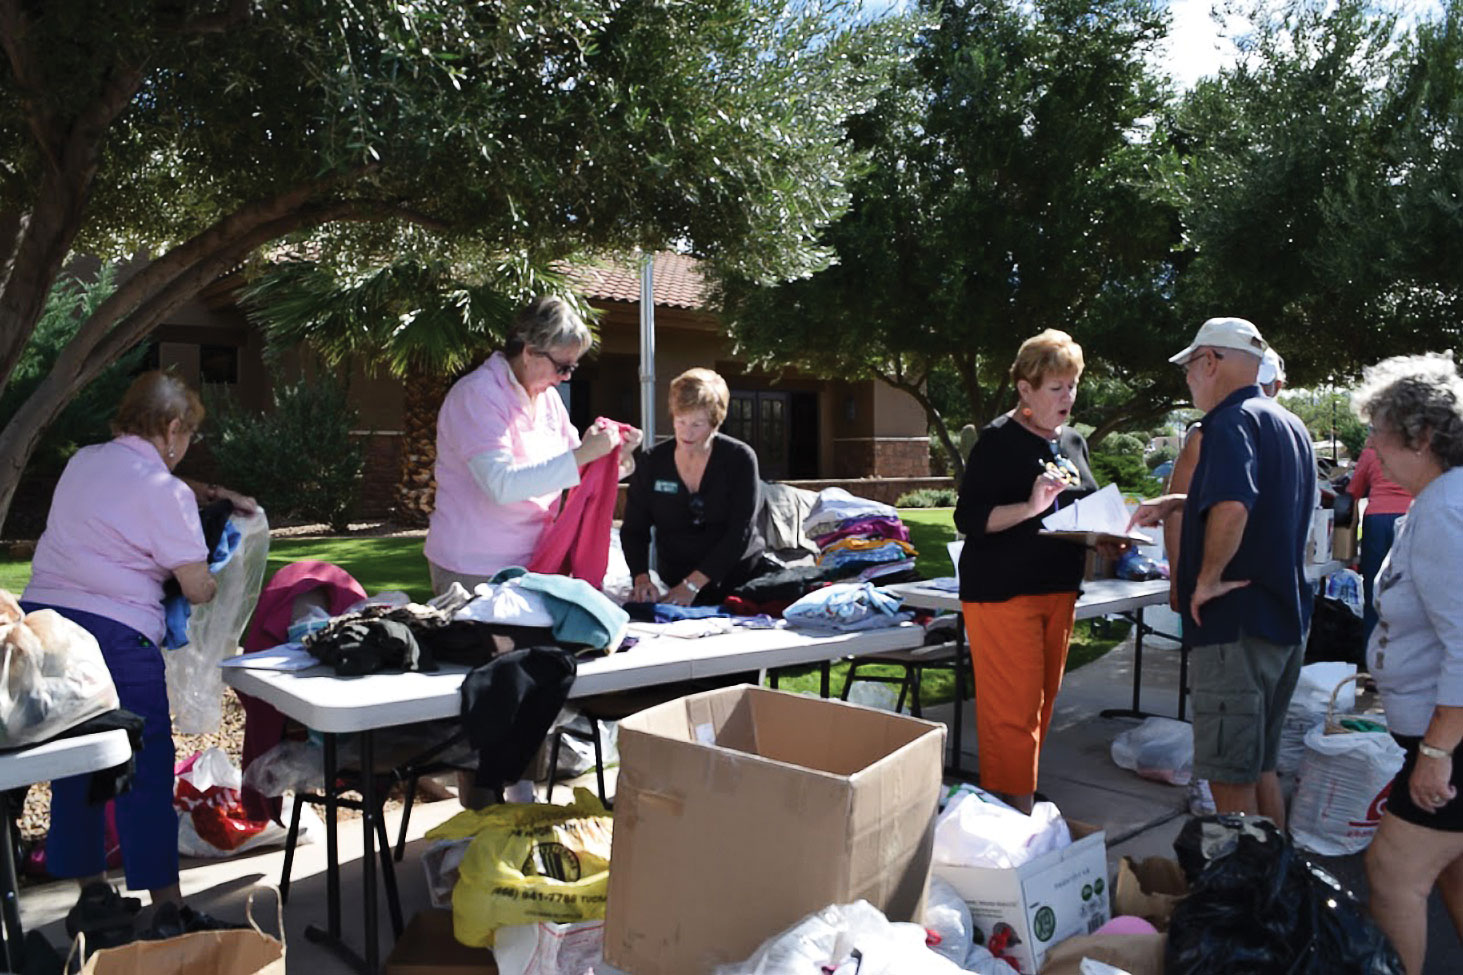 Volunteers from TWOQC gather at the Madera Clubhouse to collect, sort and bag the thousands of donated items.